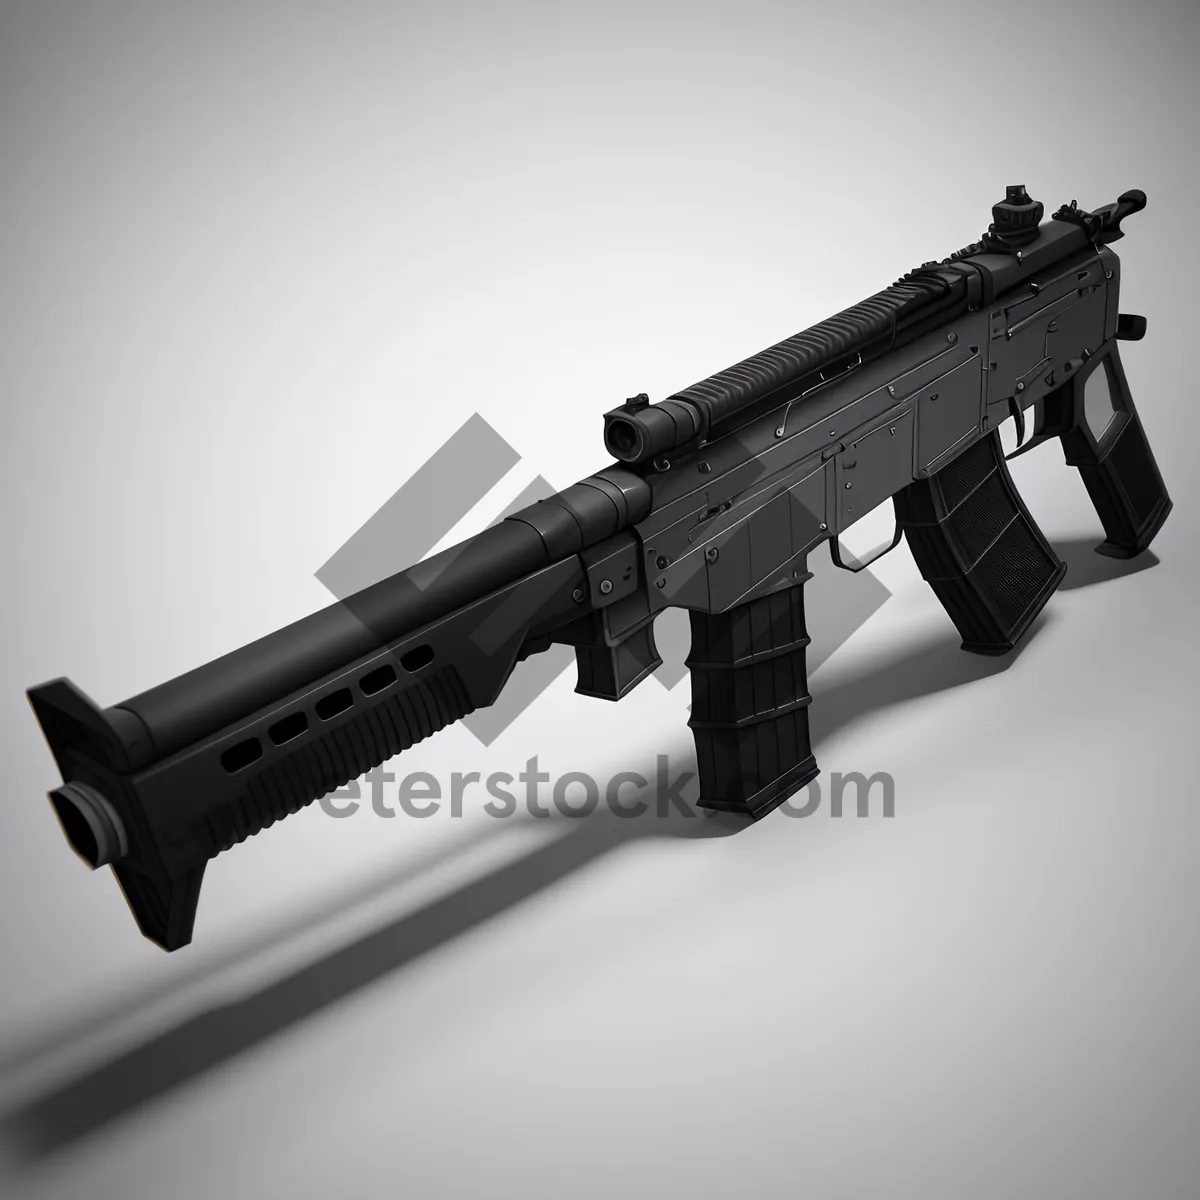 Picture of Powerful Automatic Assault Rifle for Military Use